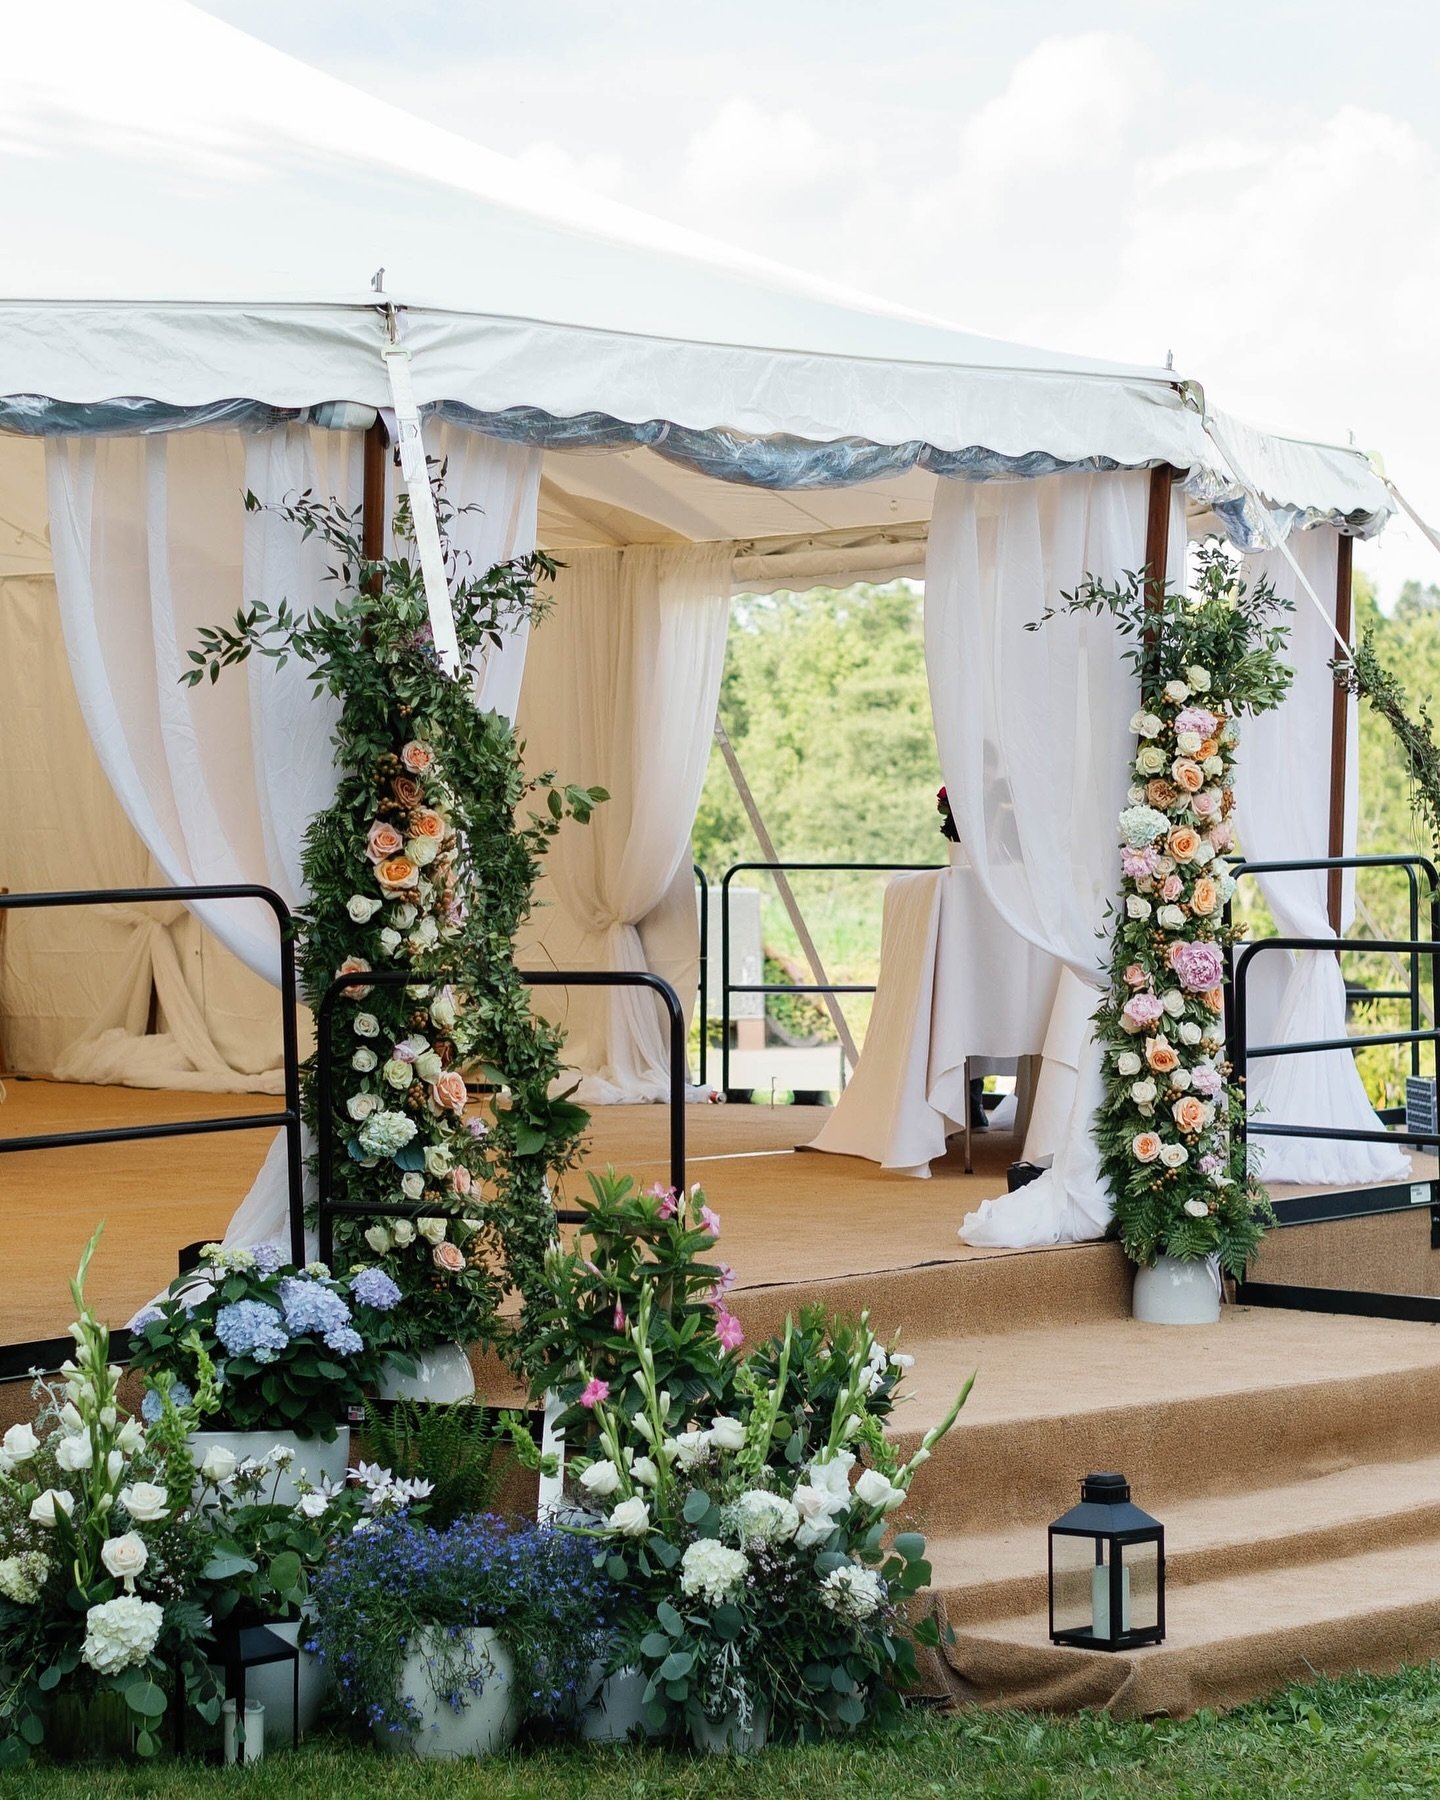 An incredible wedding planner 🤝 a florist with impeccable taste. 
@leodesigngallery and @westchesterflorist absolutely nailed Christina and Colin&rsquo;s sunny backyard wedding reception vision, and I&rsquo;ll be dreaming about this wedding for the 